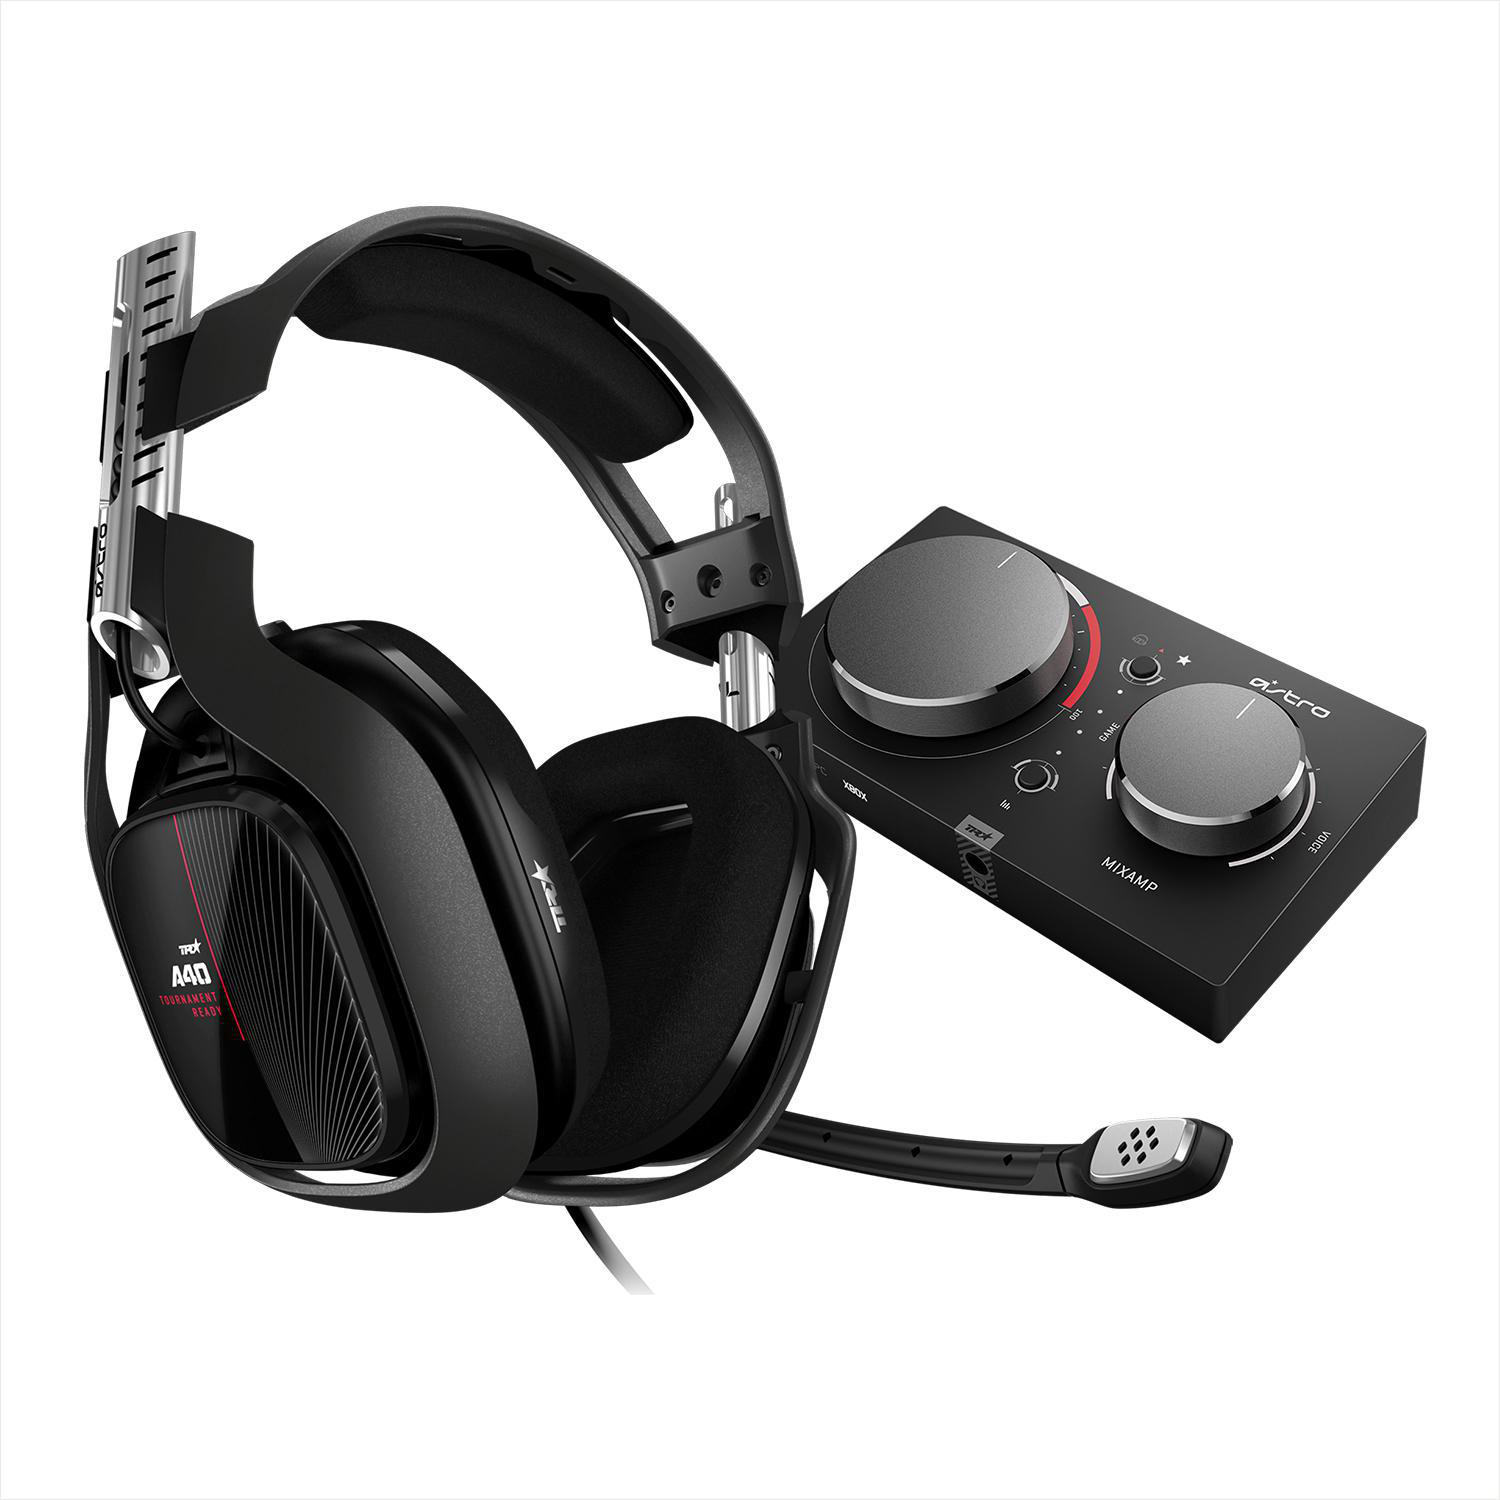 Pro A40 Xbox PC, & TR X|S One, GAMING + Schwarz ASTRO Over-ear TR Xbox for Headset Gaming MixAmp